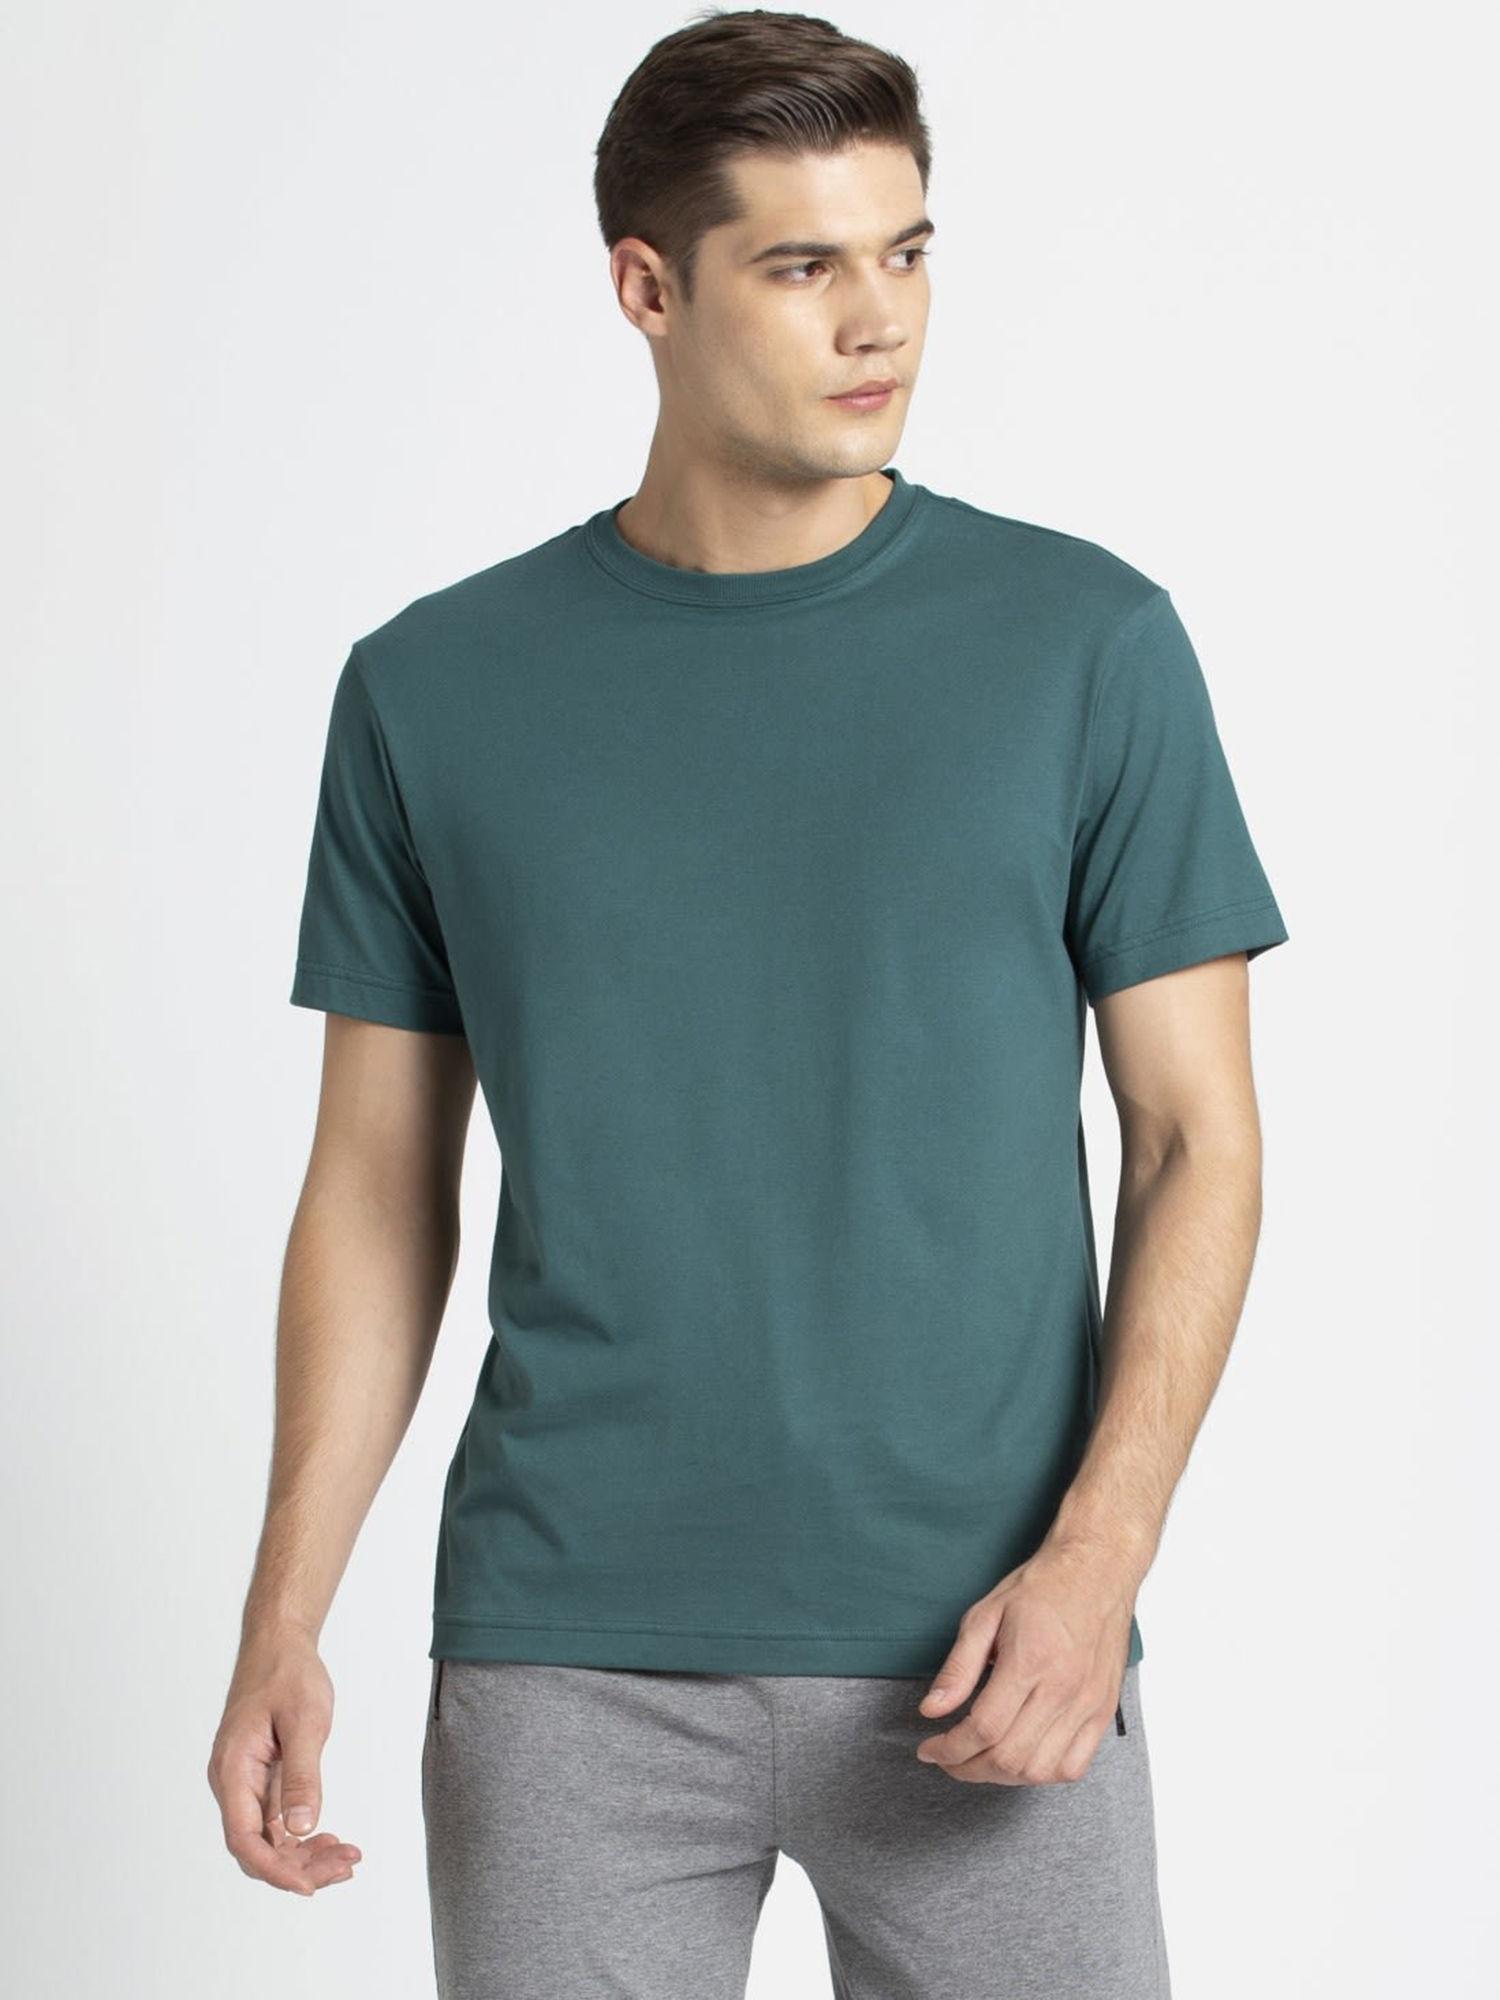 2714-men's-super-combed-cotton-rich-solid-round-neck-half-sleeve-t-shirt---pacific-green